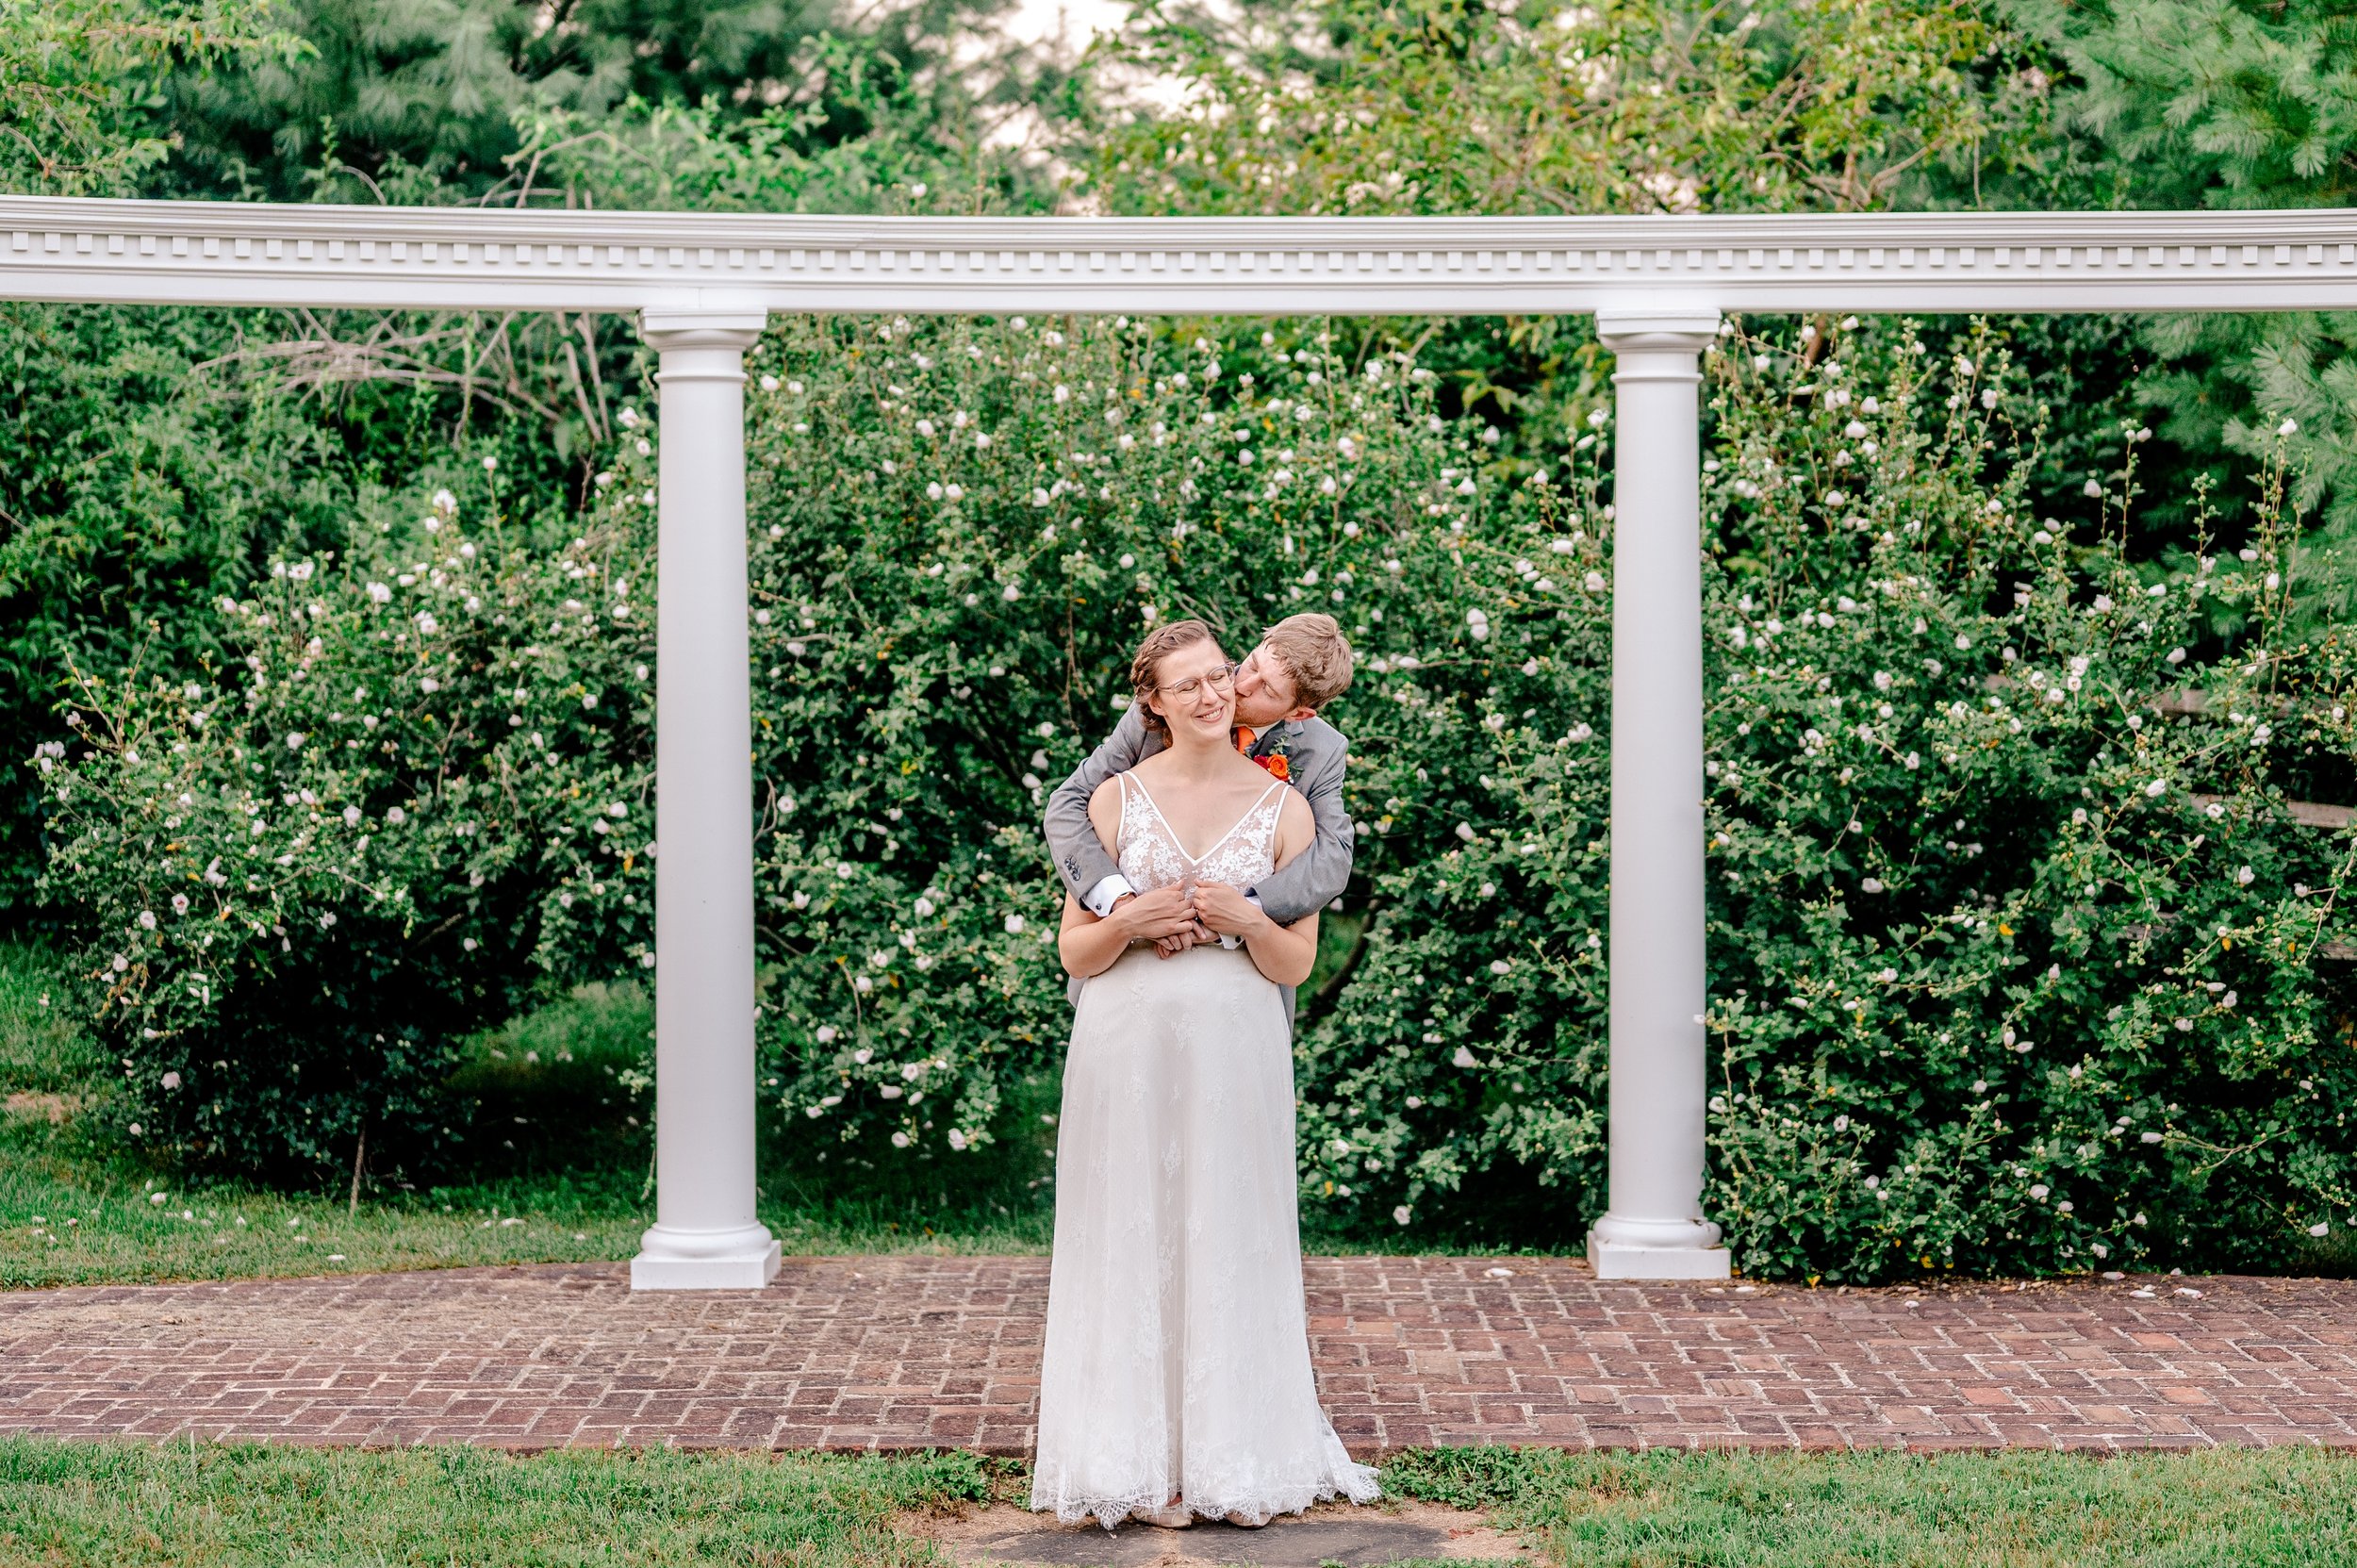 A bride and groom smile in an embrace while standing on the patio during their wedding at Rose Hill Manor in Loudoun County Virginia